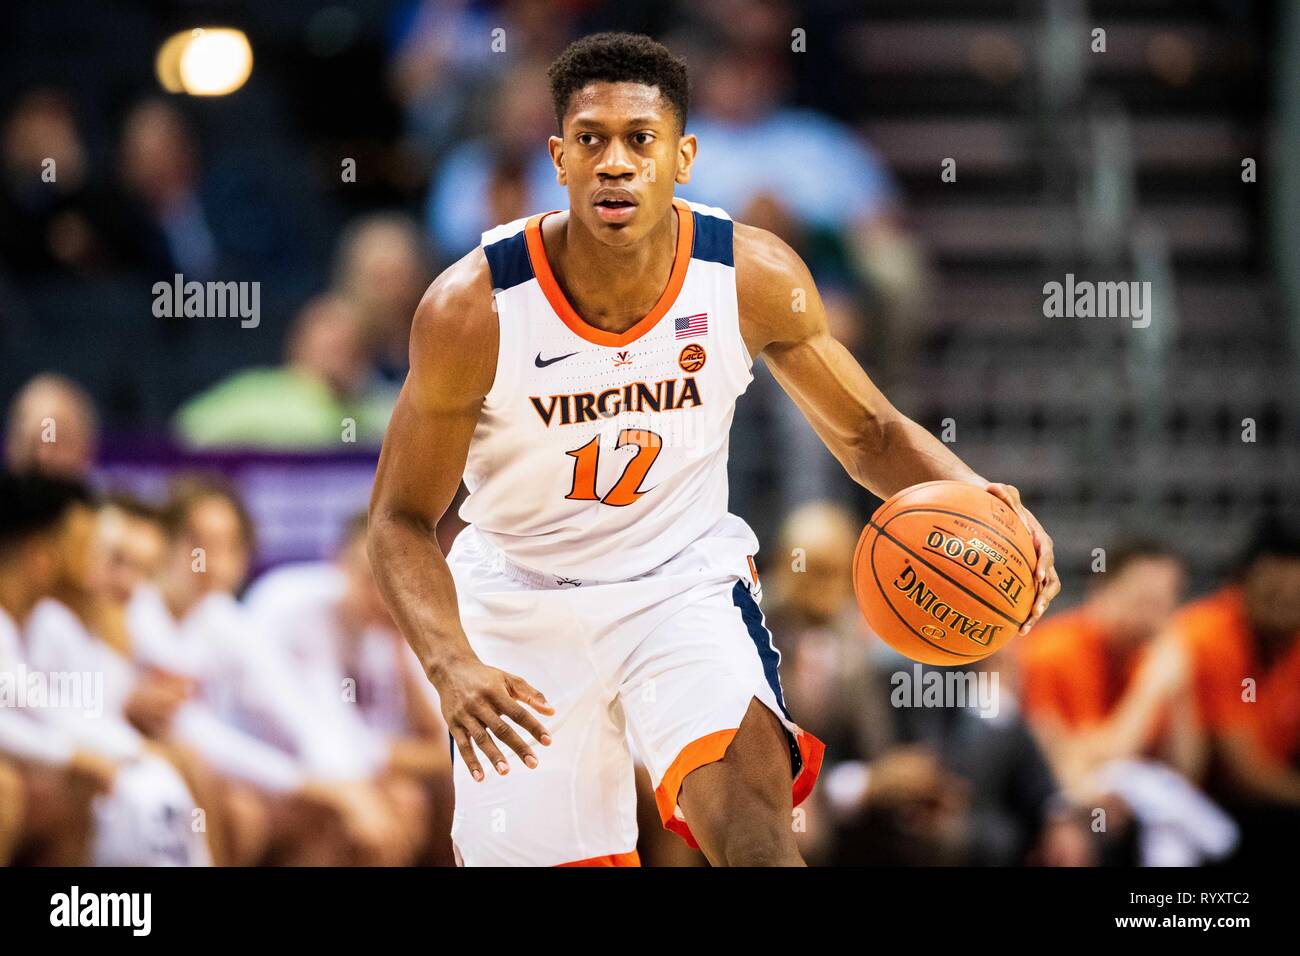 Virginia Cavaliers guard De'Andre Hunter (12) during the ACC College Basketball Tournament game between the Florida State Seminoles and the Virginia Cavaliers at the Spectrum Center on Friday March 15, 2019 in Charlotte, NC. Jacob Kupferman/CSM Stock Photo